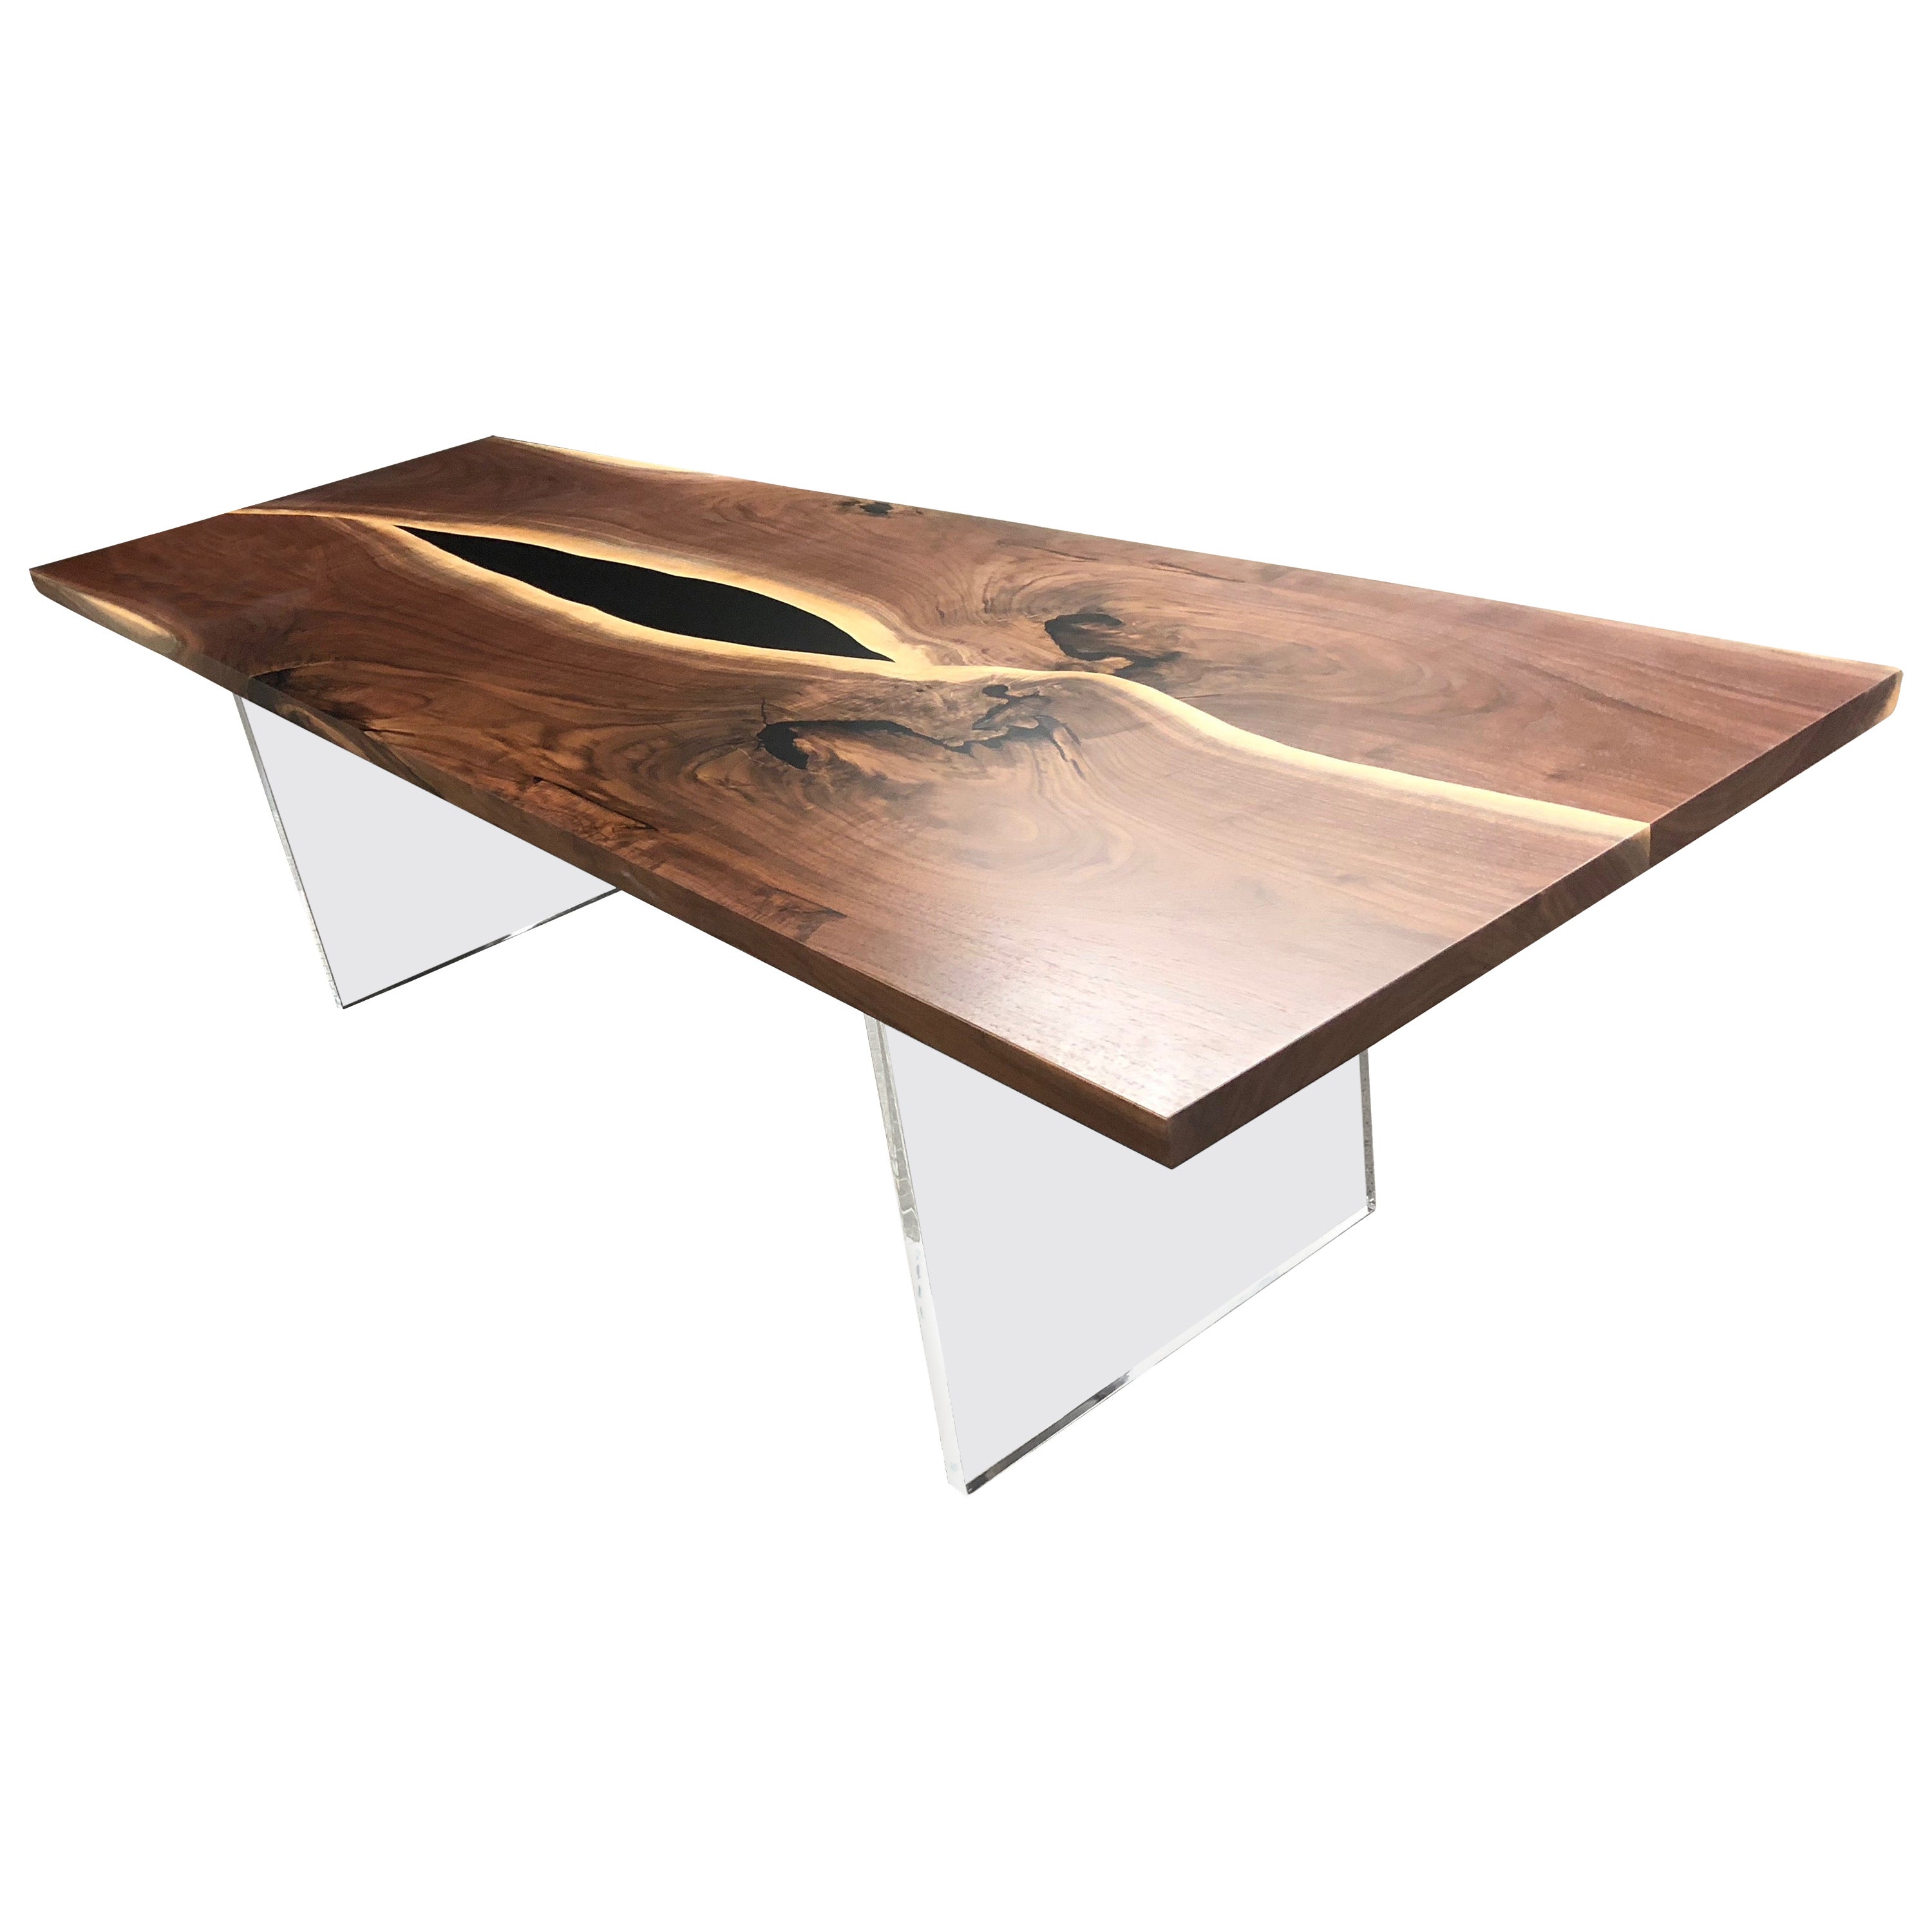 Reverse live edge walnut dining table For Sale